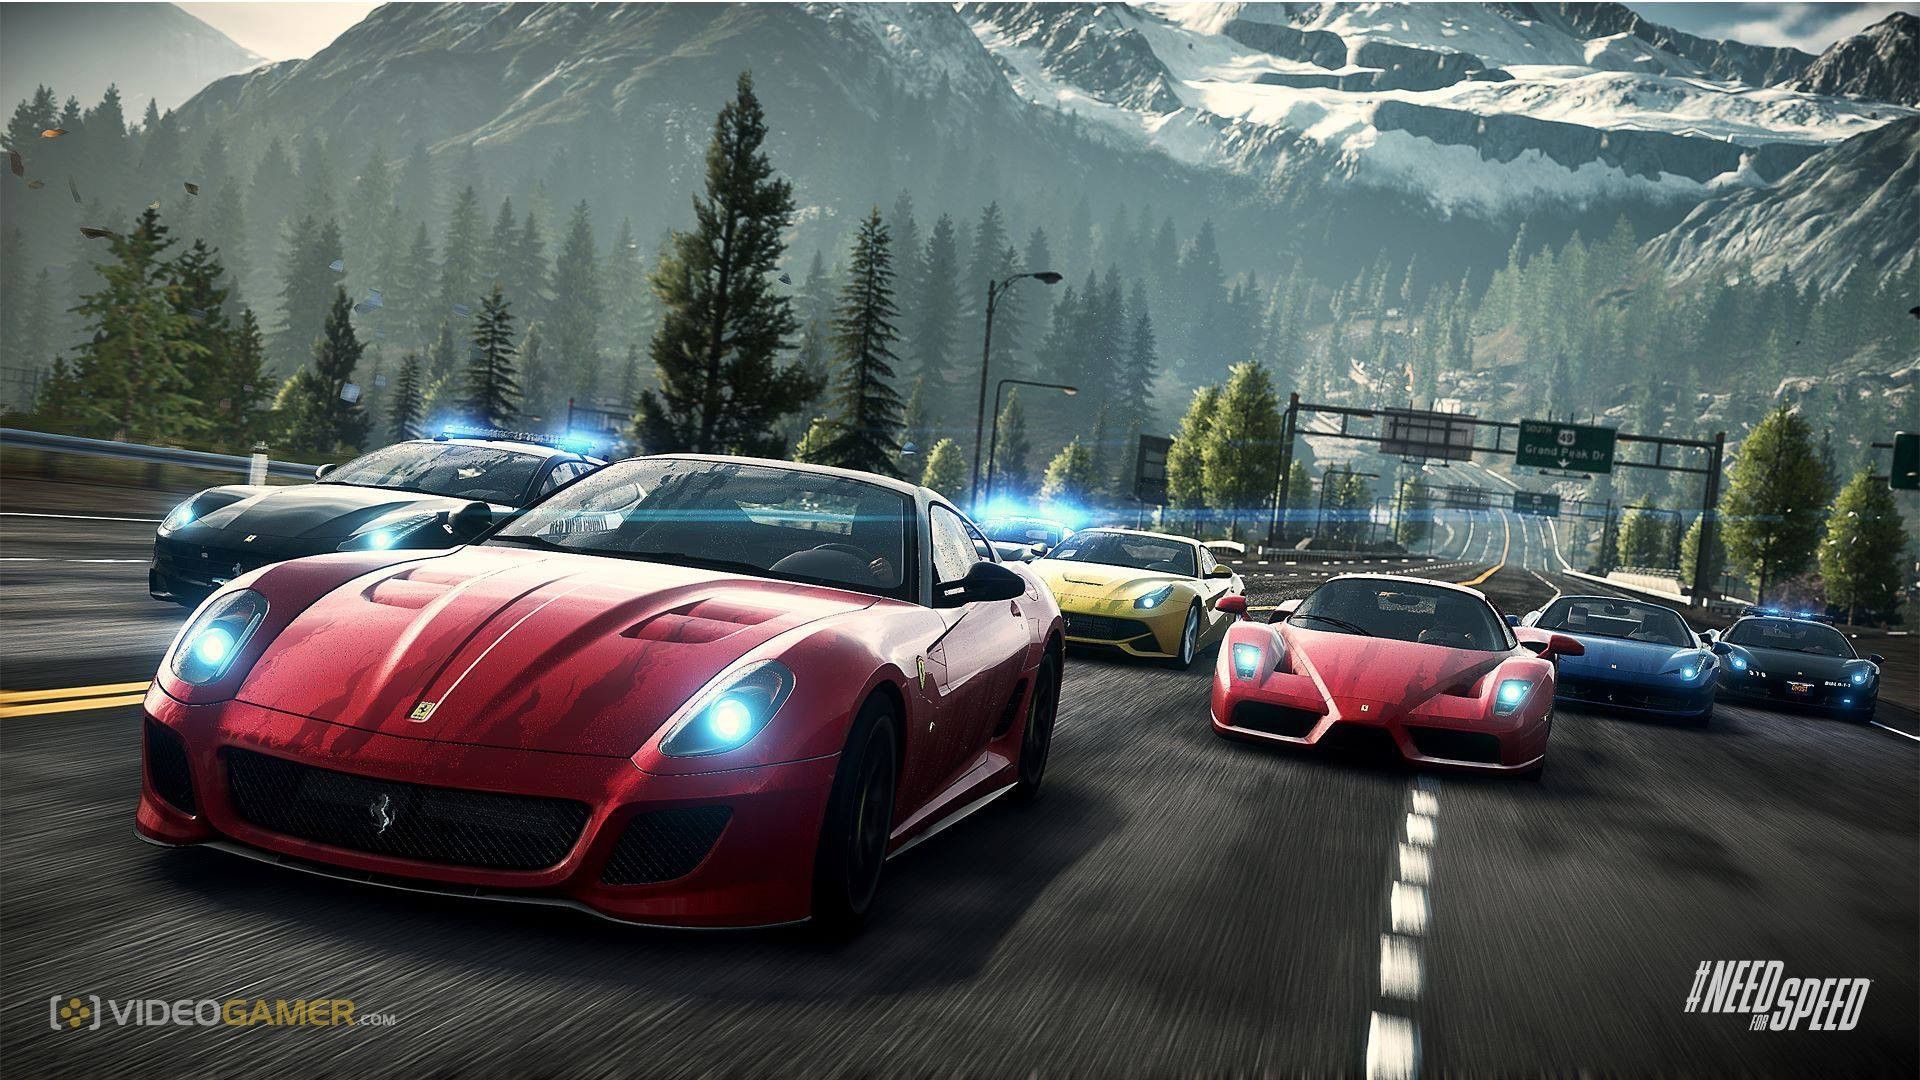 Need For Speed wallpaper 1920x1080